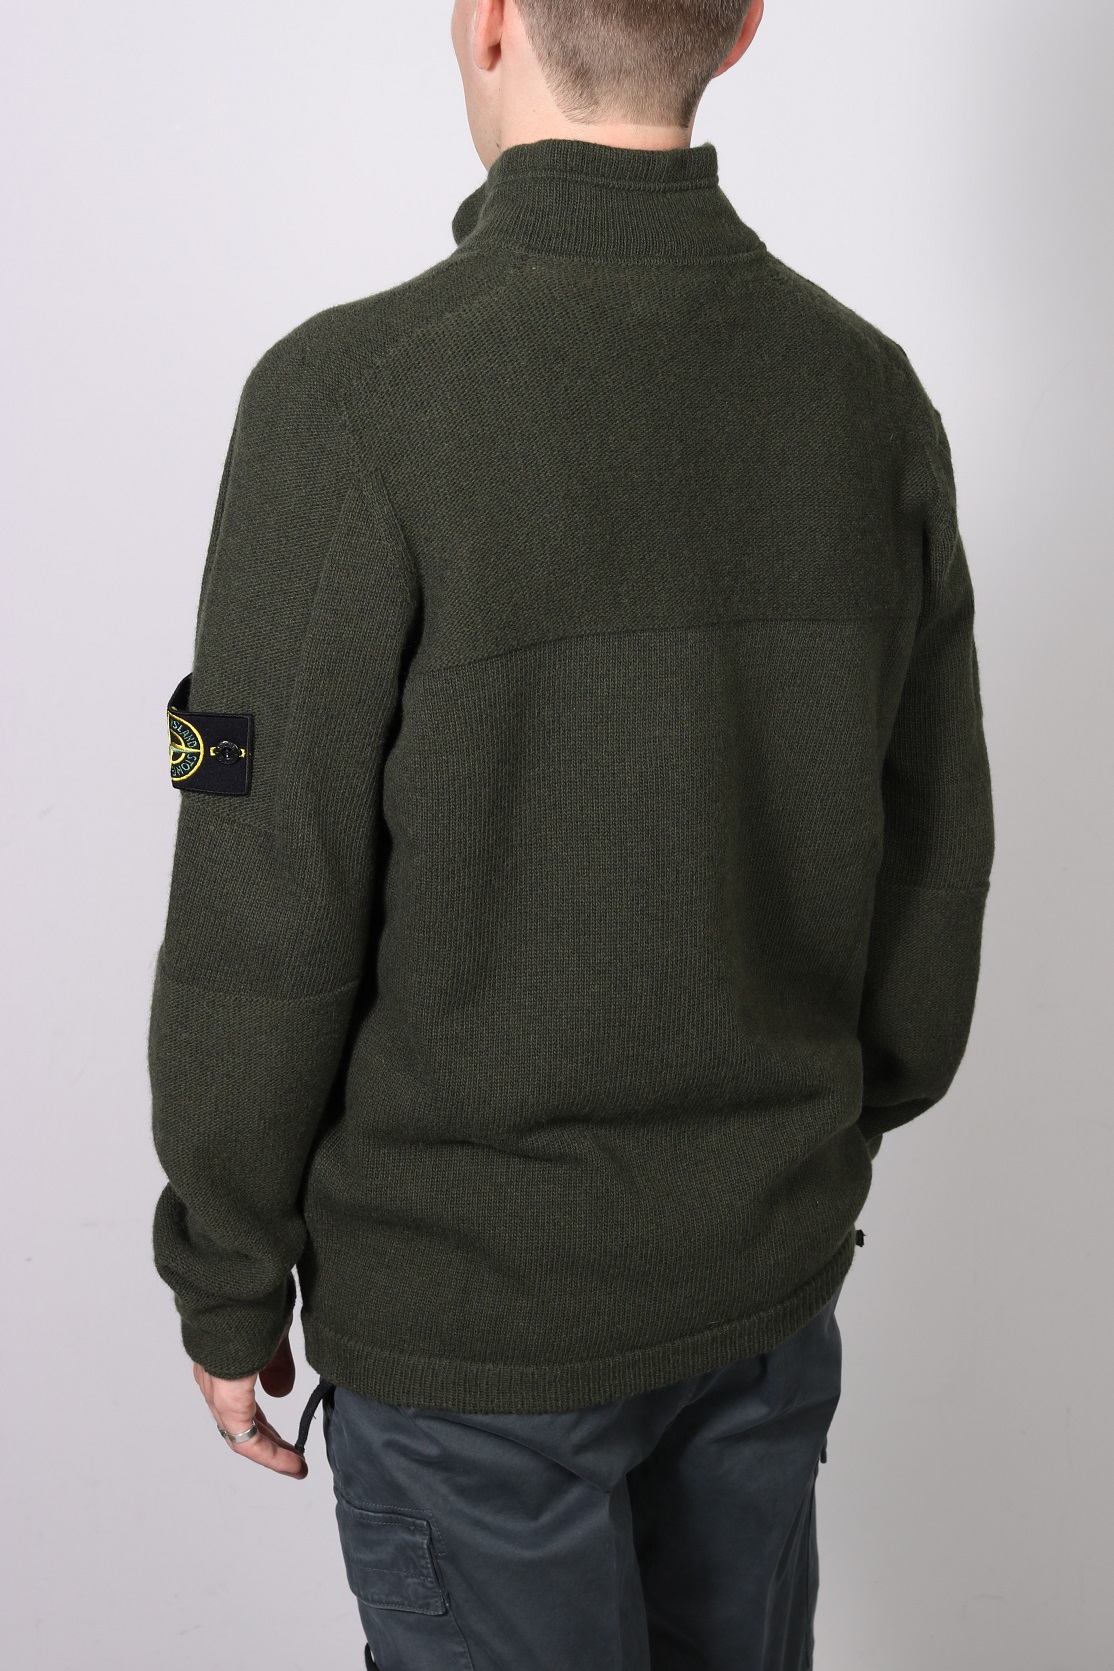 STONE ISLAND Halfzip Knit Sweater in Olive